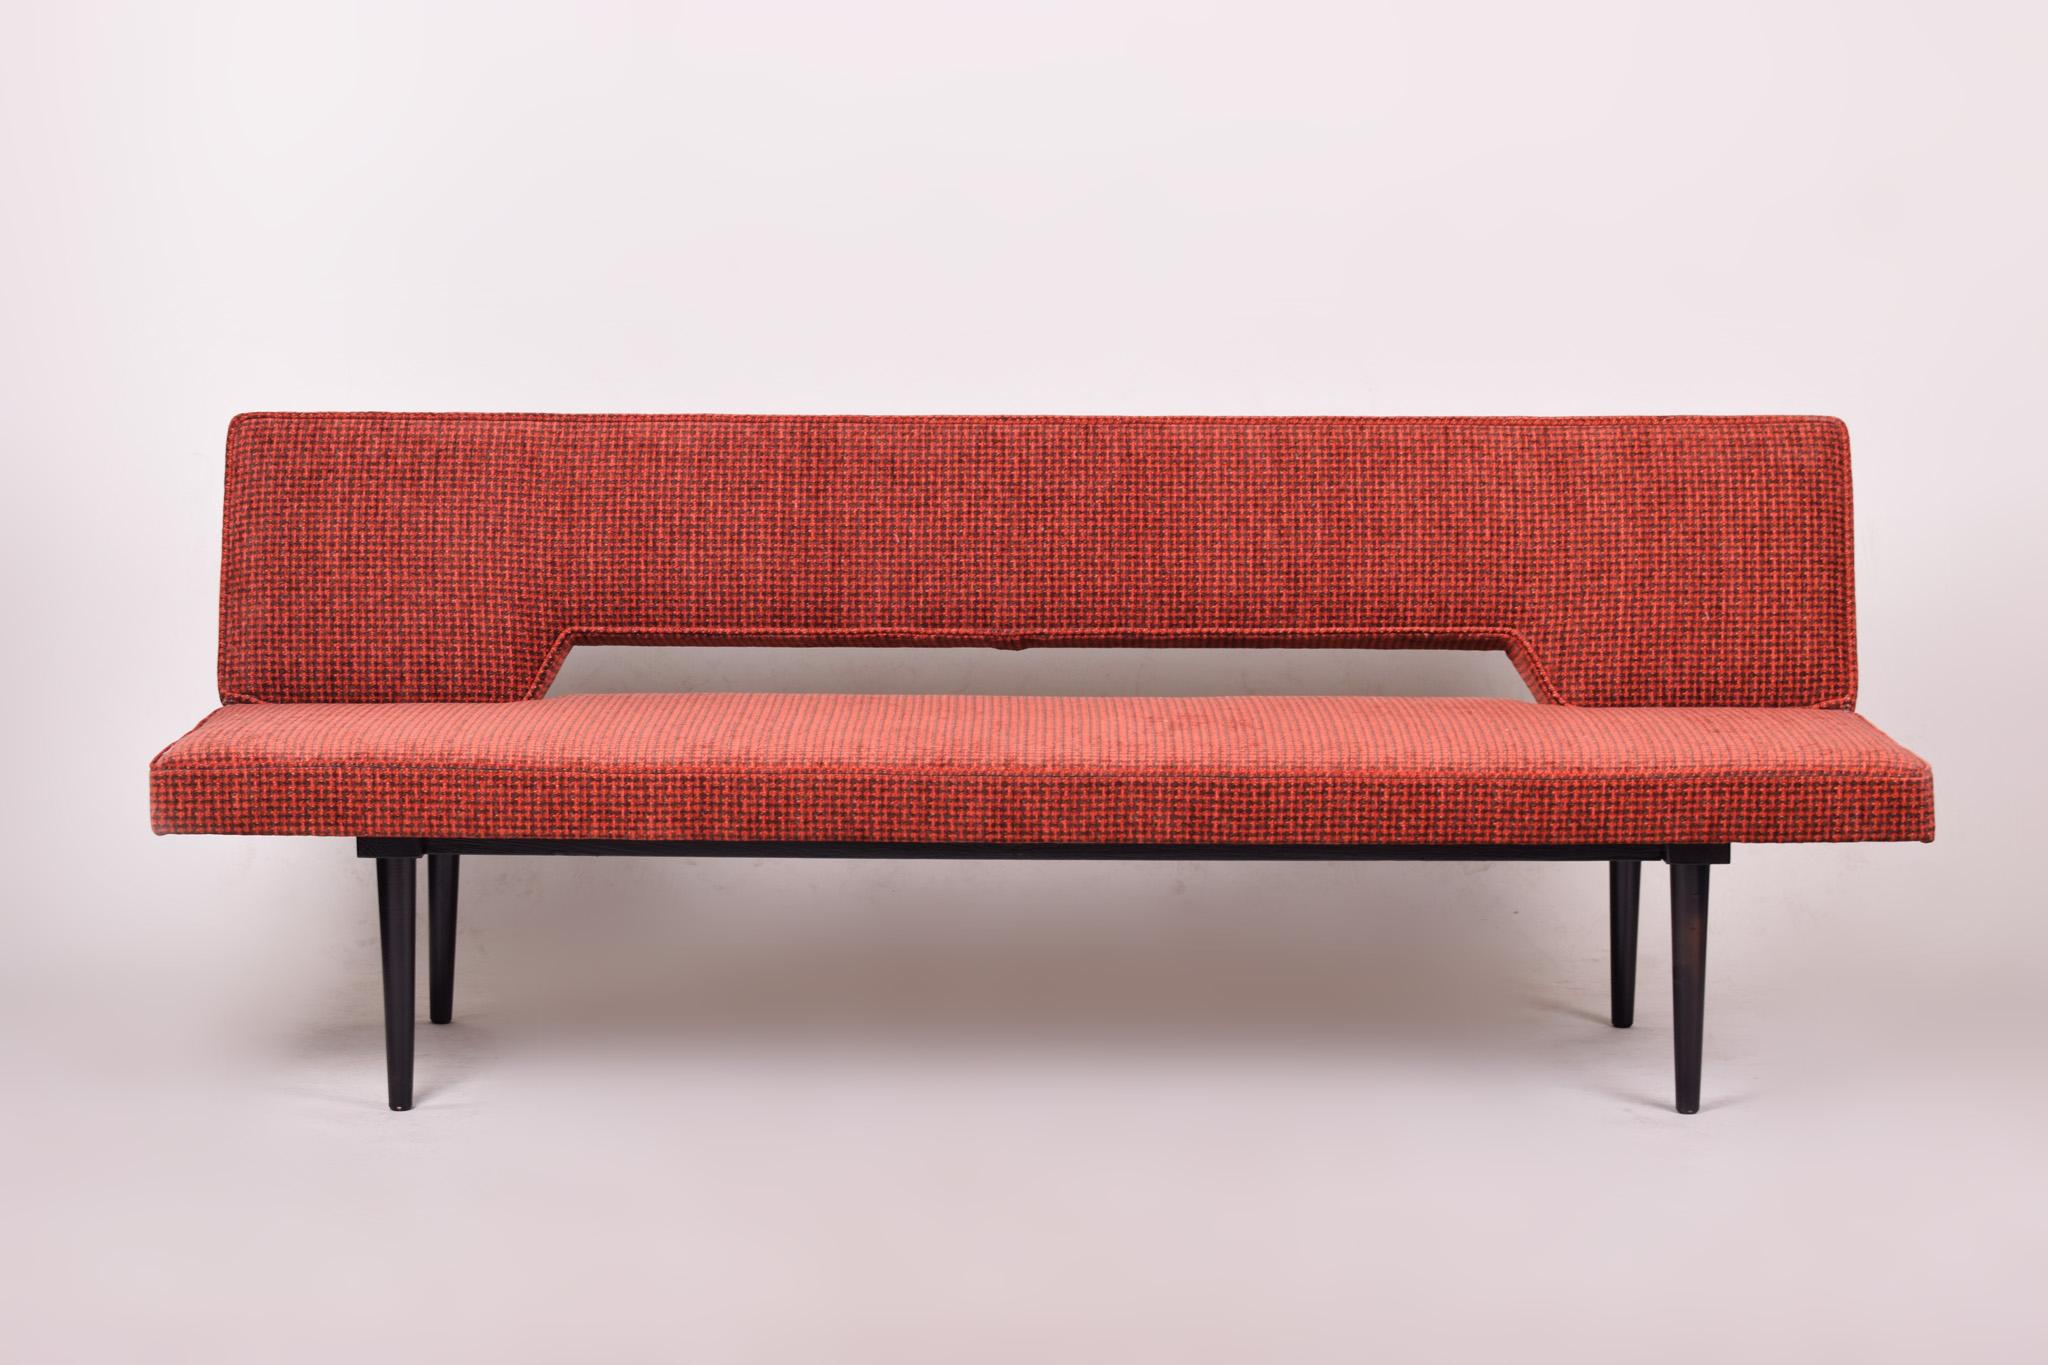 Czechoslovakian Mid-Century Modern sofa
Completely restored. New fabric and upholstery, 1962.